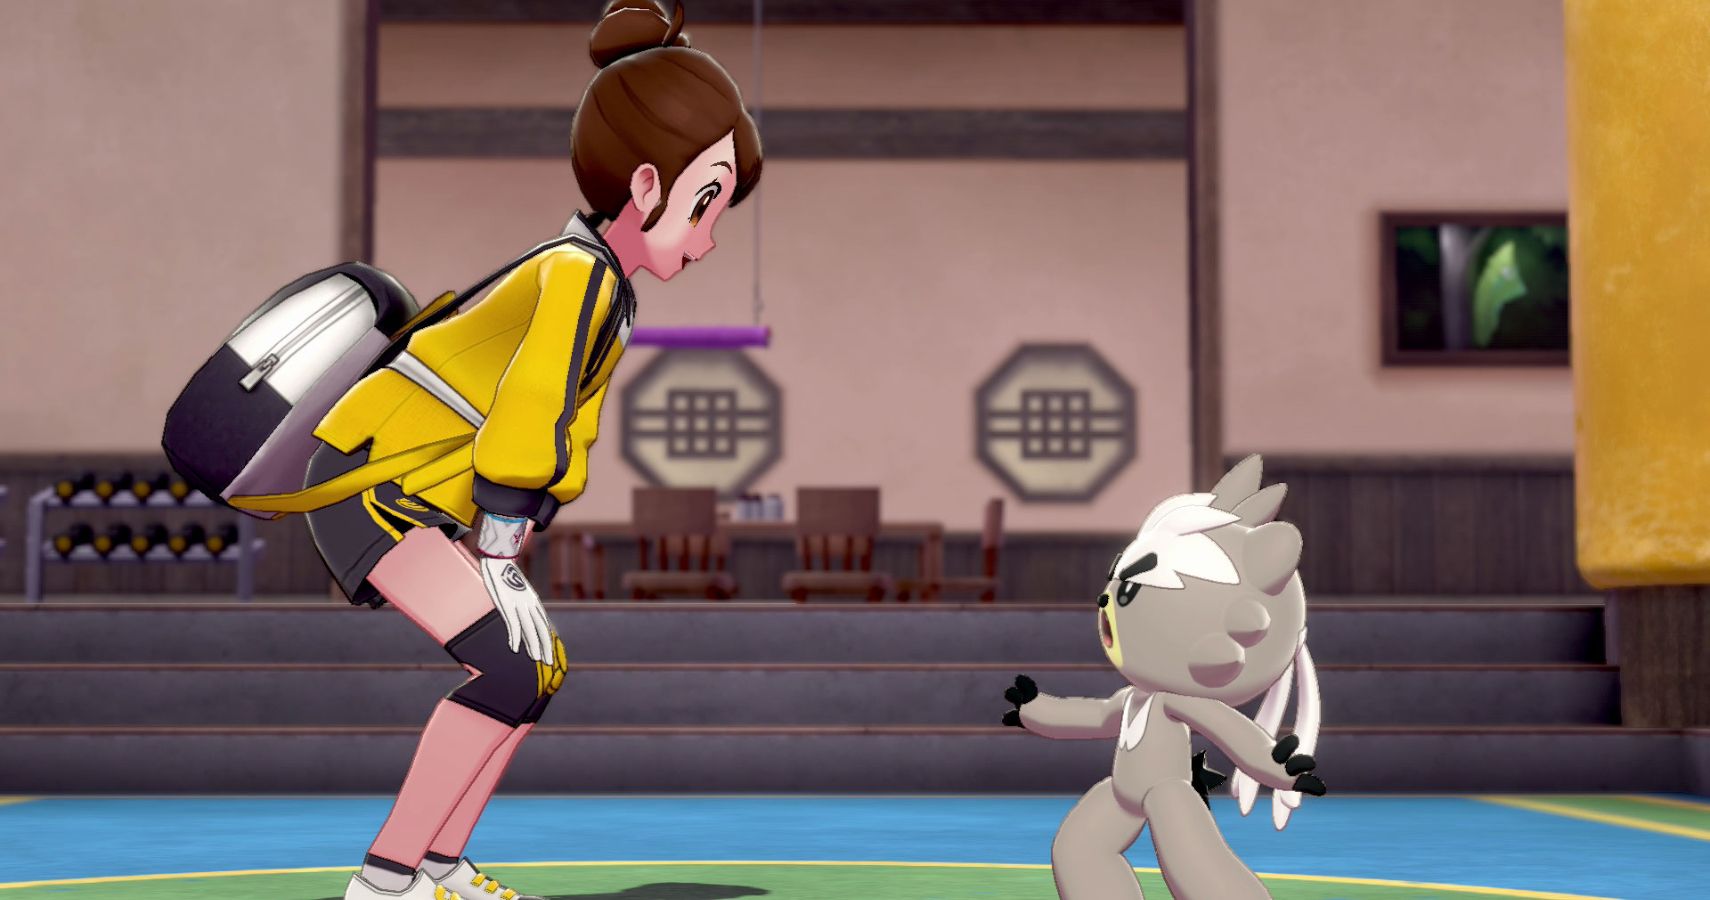 Pokémon Sword & Shield: 10 Pro Tips For The Isle Of Armor You Need